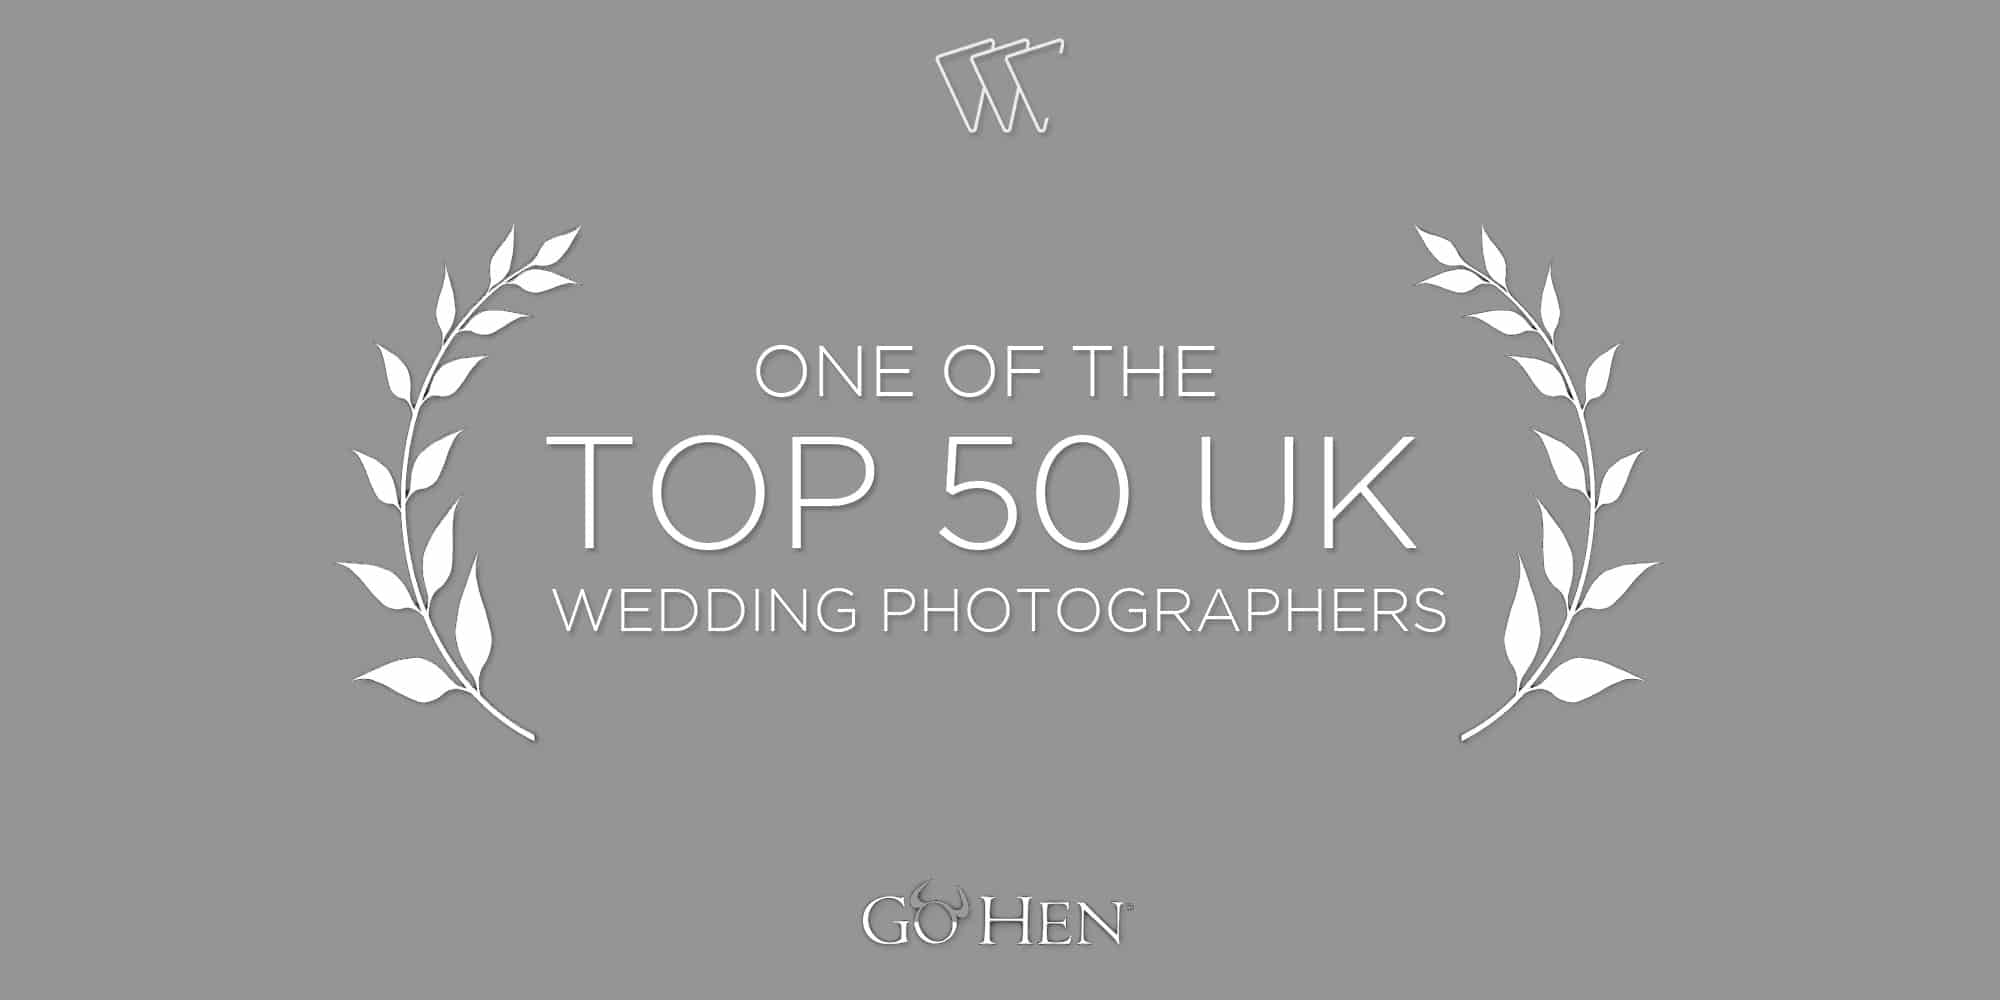 Murray Clarke is one of the 's Top 50 Wedding Photographers.